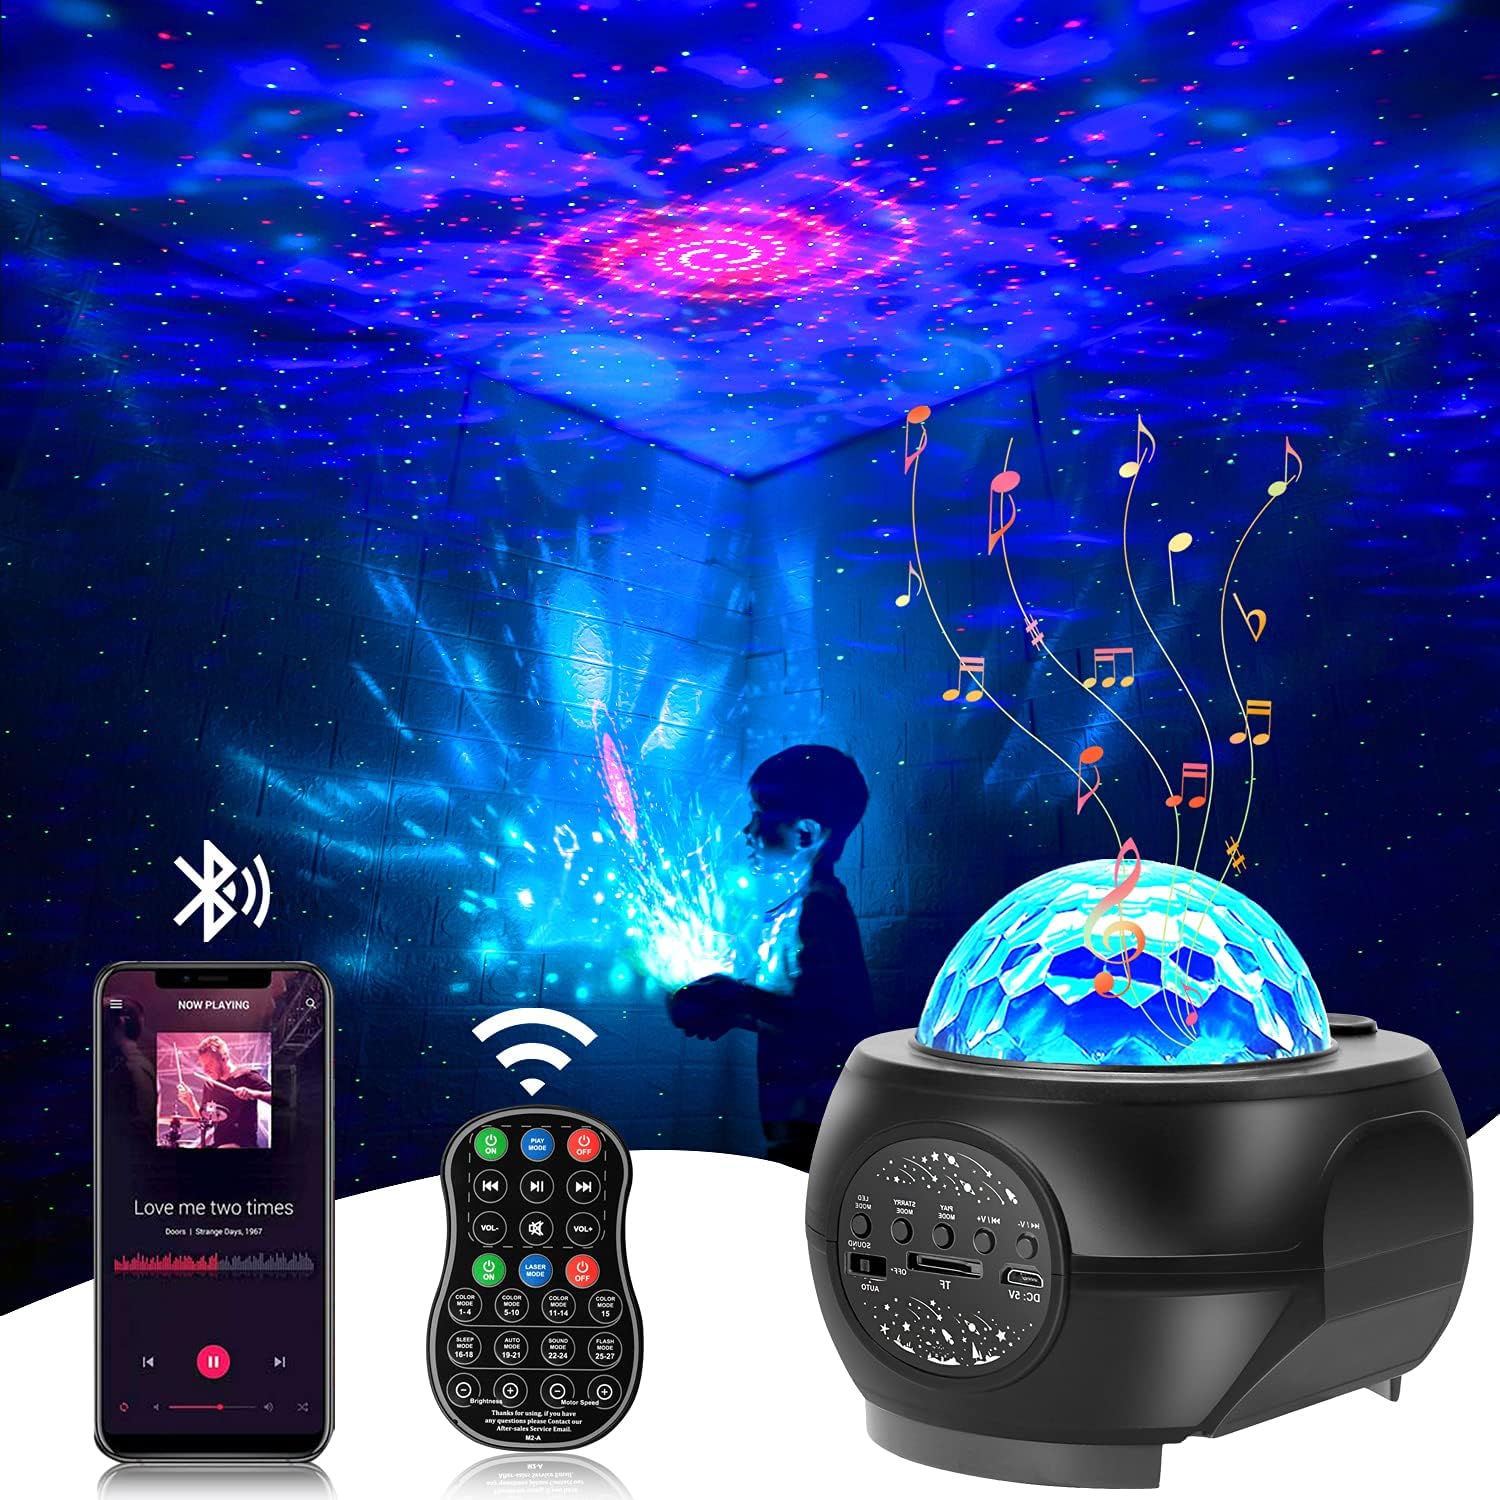 Star Projector Light,Star Galaxy Projector,with Bluetooth Speaker Remote Control,Galaxy Projector for Bedroom Adults,Starry Night Light Projector for Kids Adults Christmas Gift 